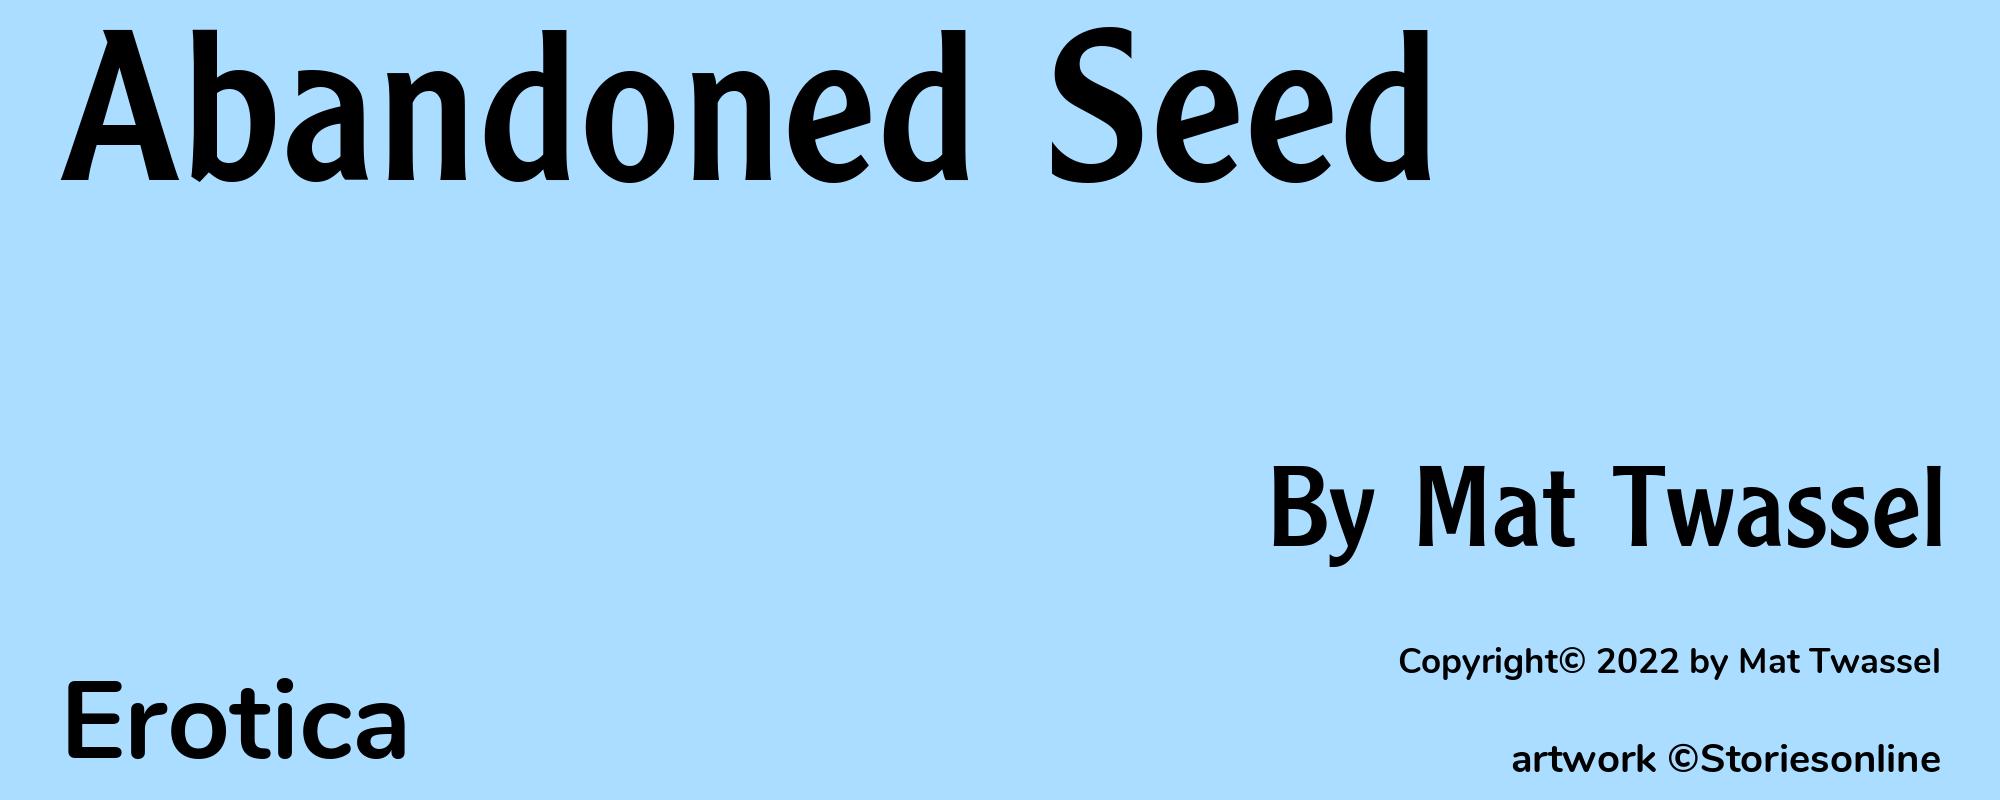 Abandoned Seed - Cover